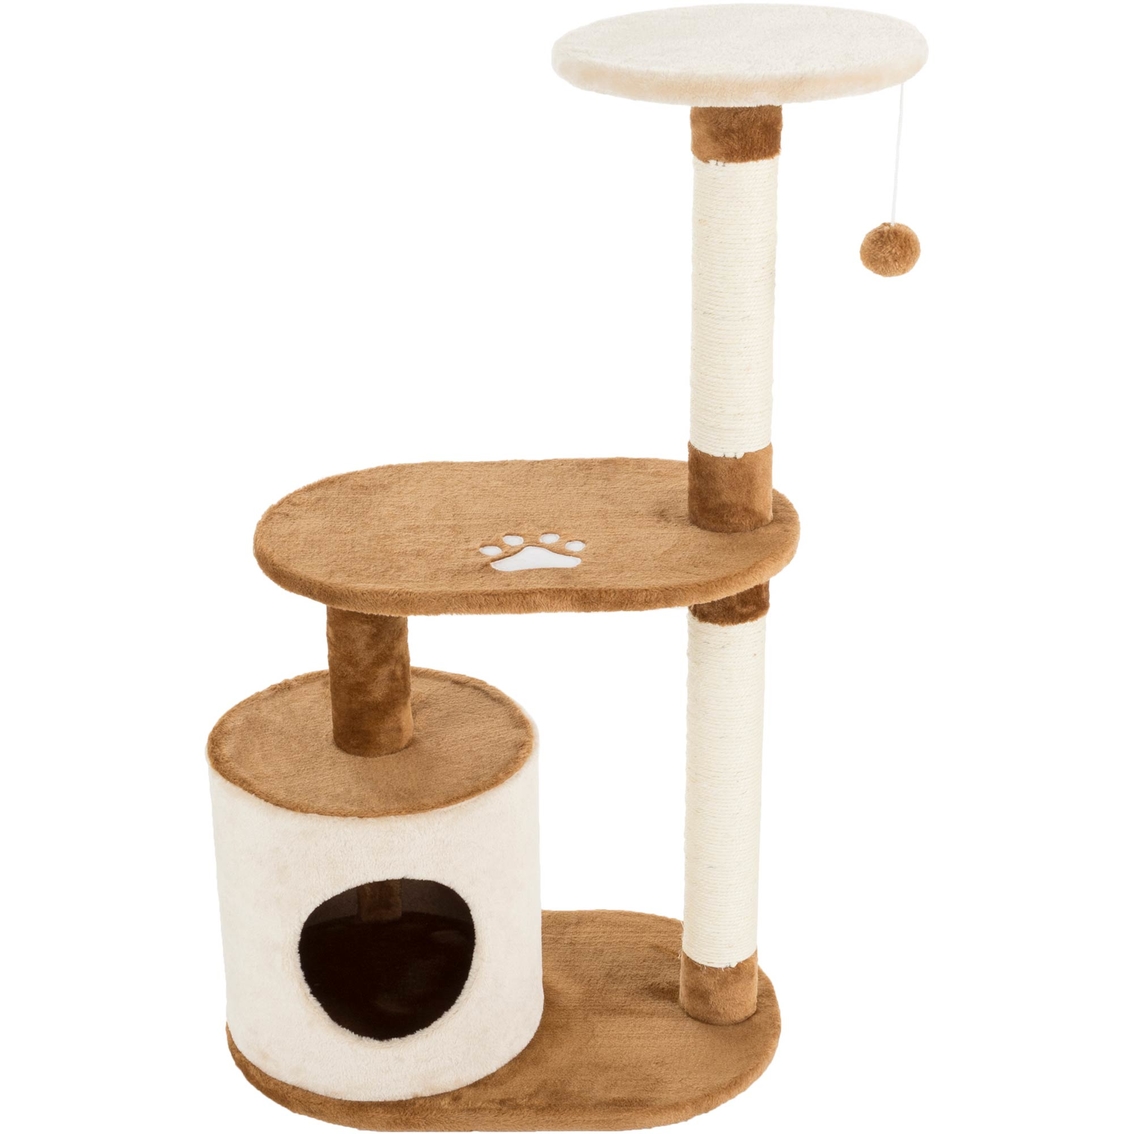 Petmaker Cat Tree Condo 3 Tier with Condo and Scratching Posts - Image 6 of 6